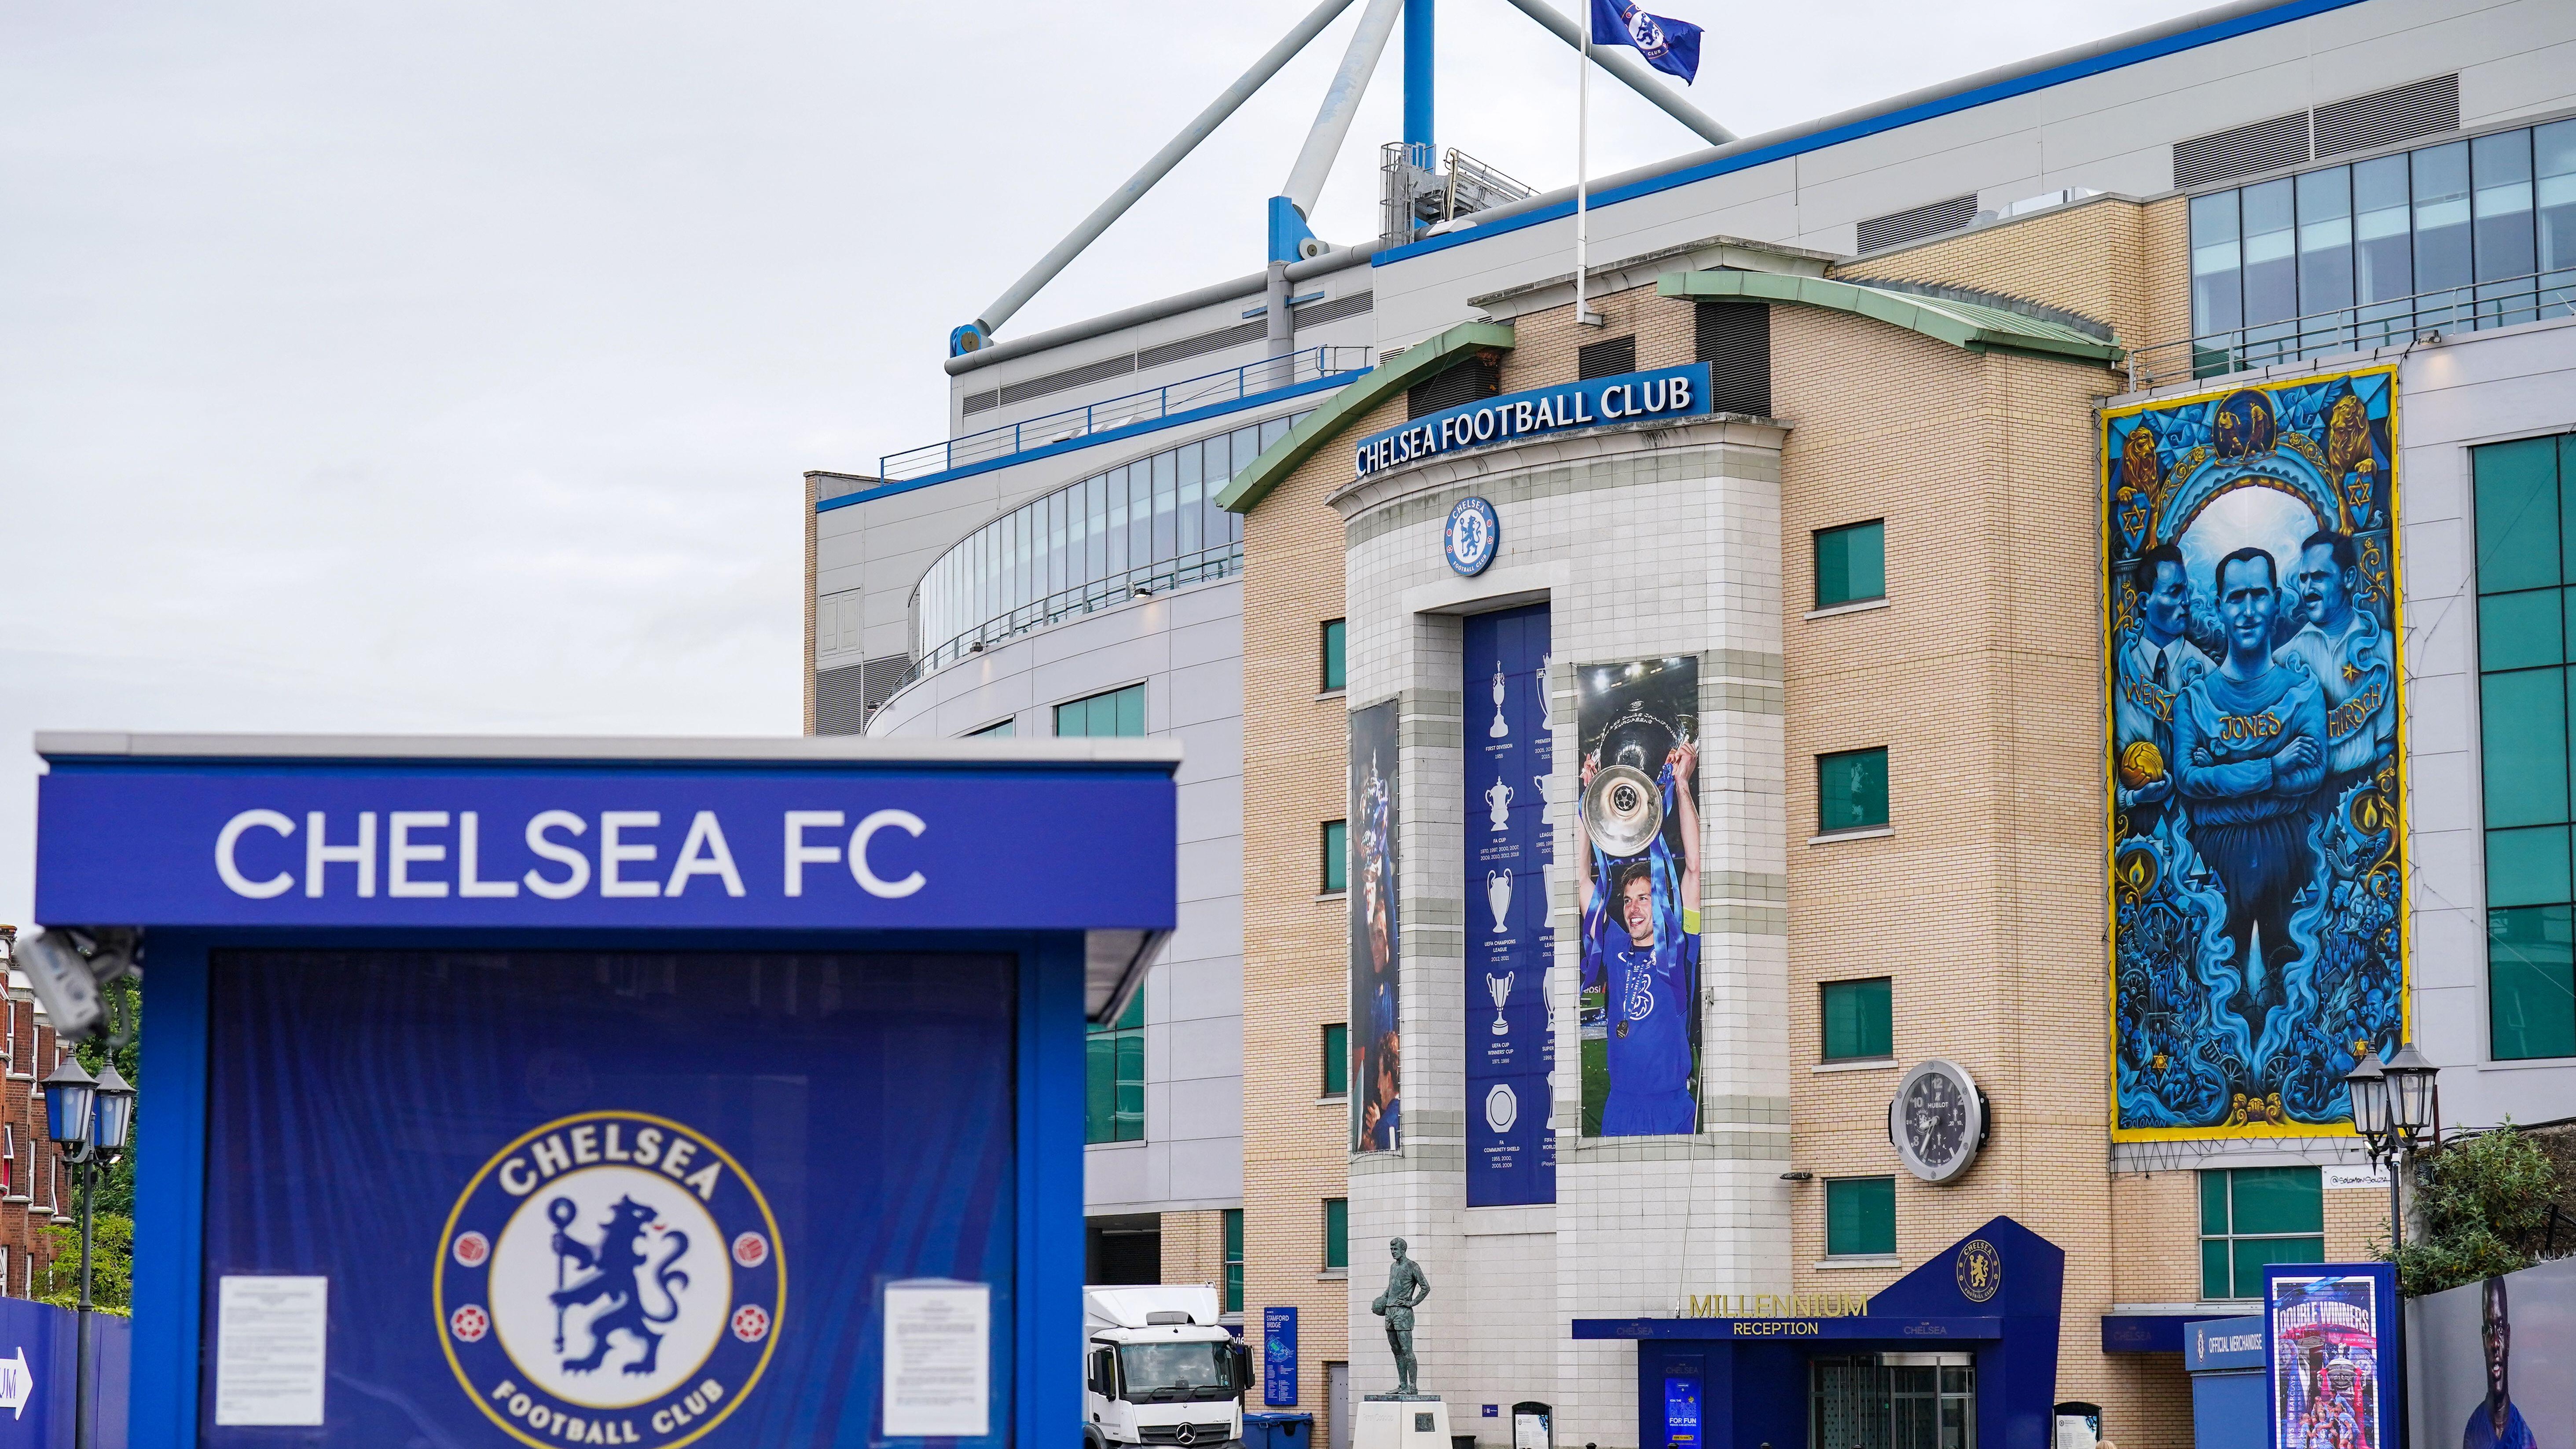 Chelsea football club officially under new ownership